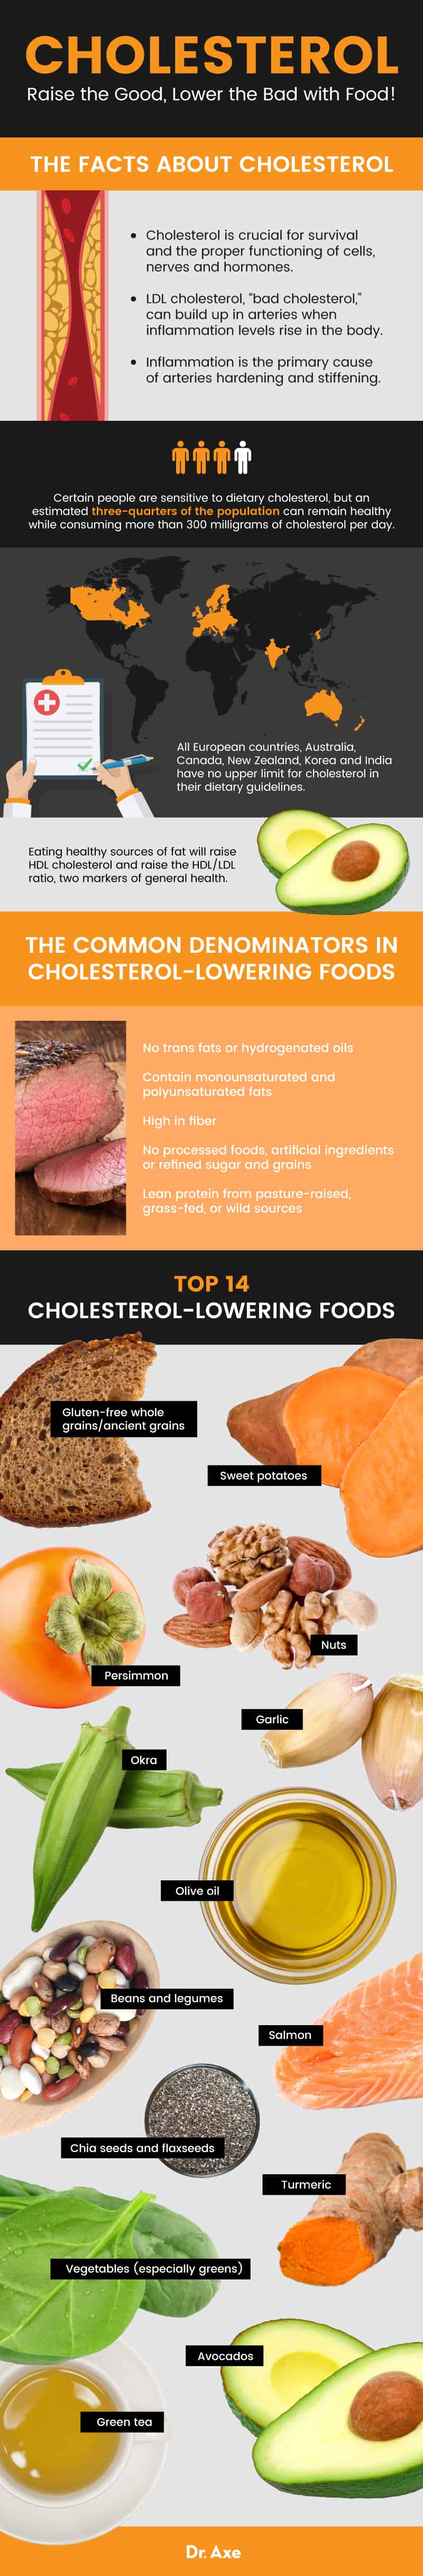 top 14foods that lower cholesterol - dr. axe